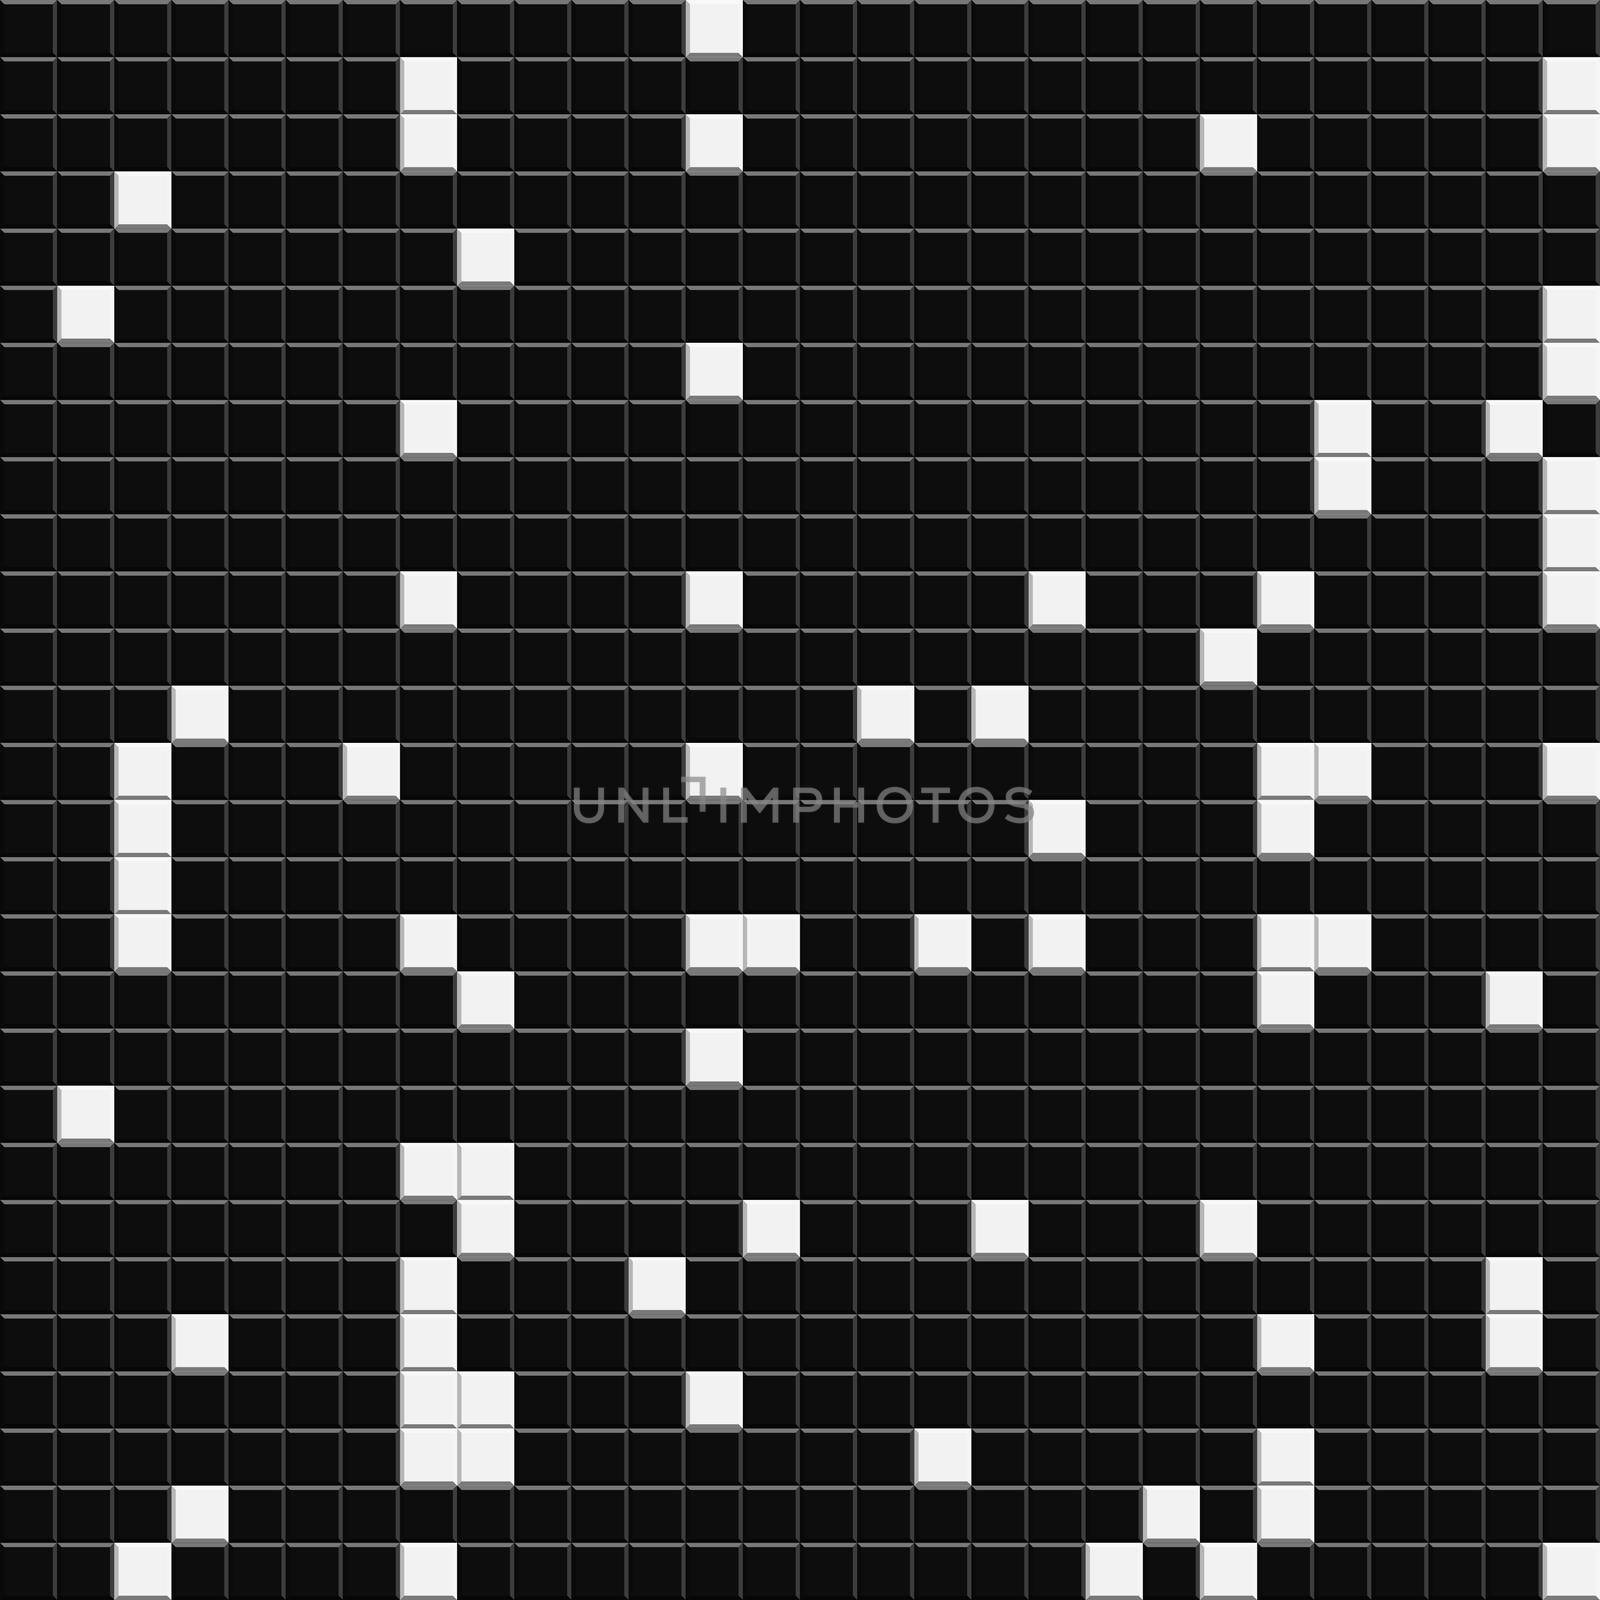 Black and white small cubical bricks pattern on solid sheet of wallpaper. Concept of home decor and interior designing by tabishere